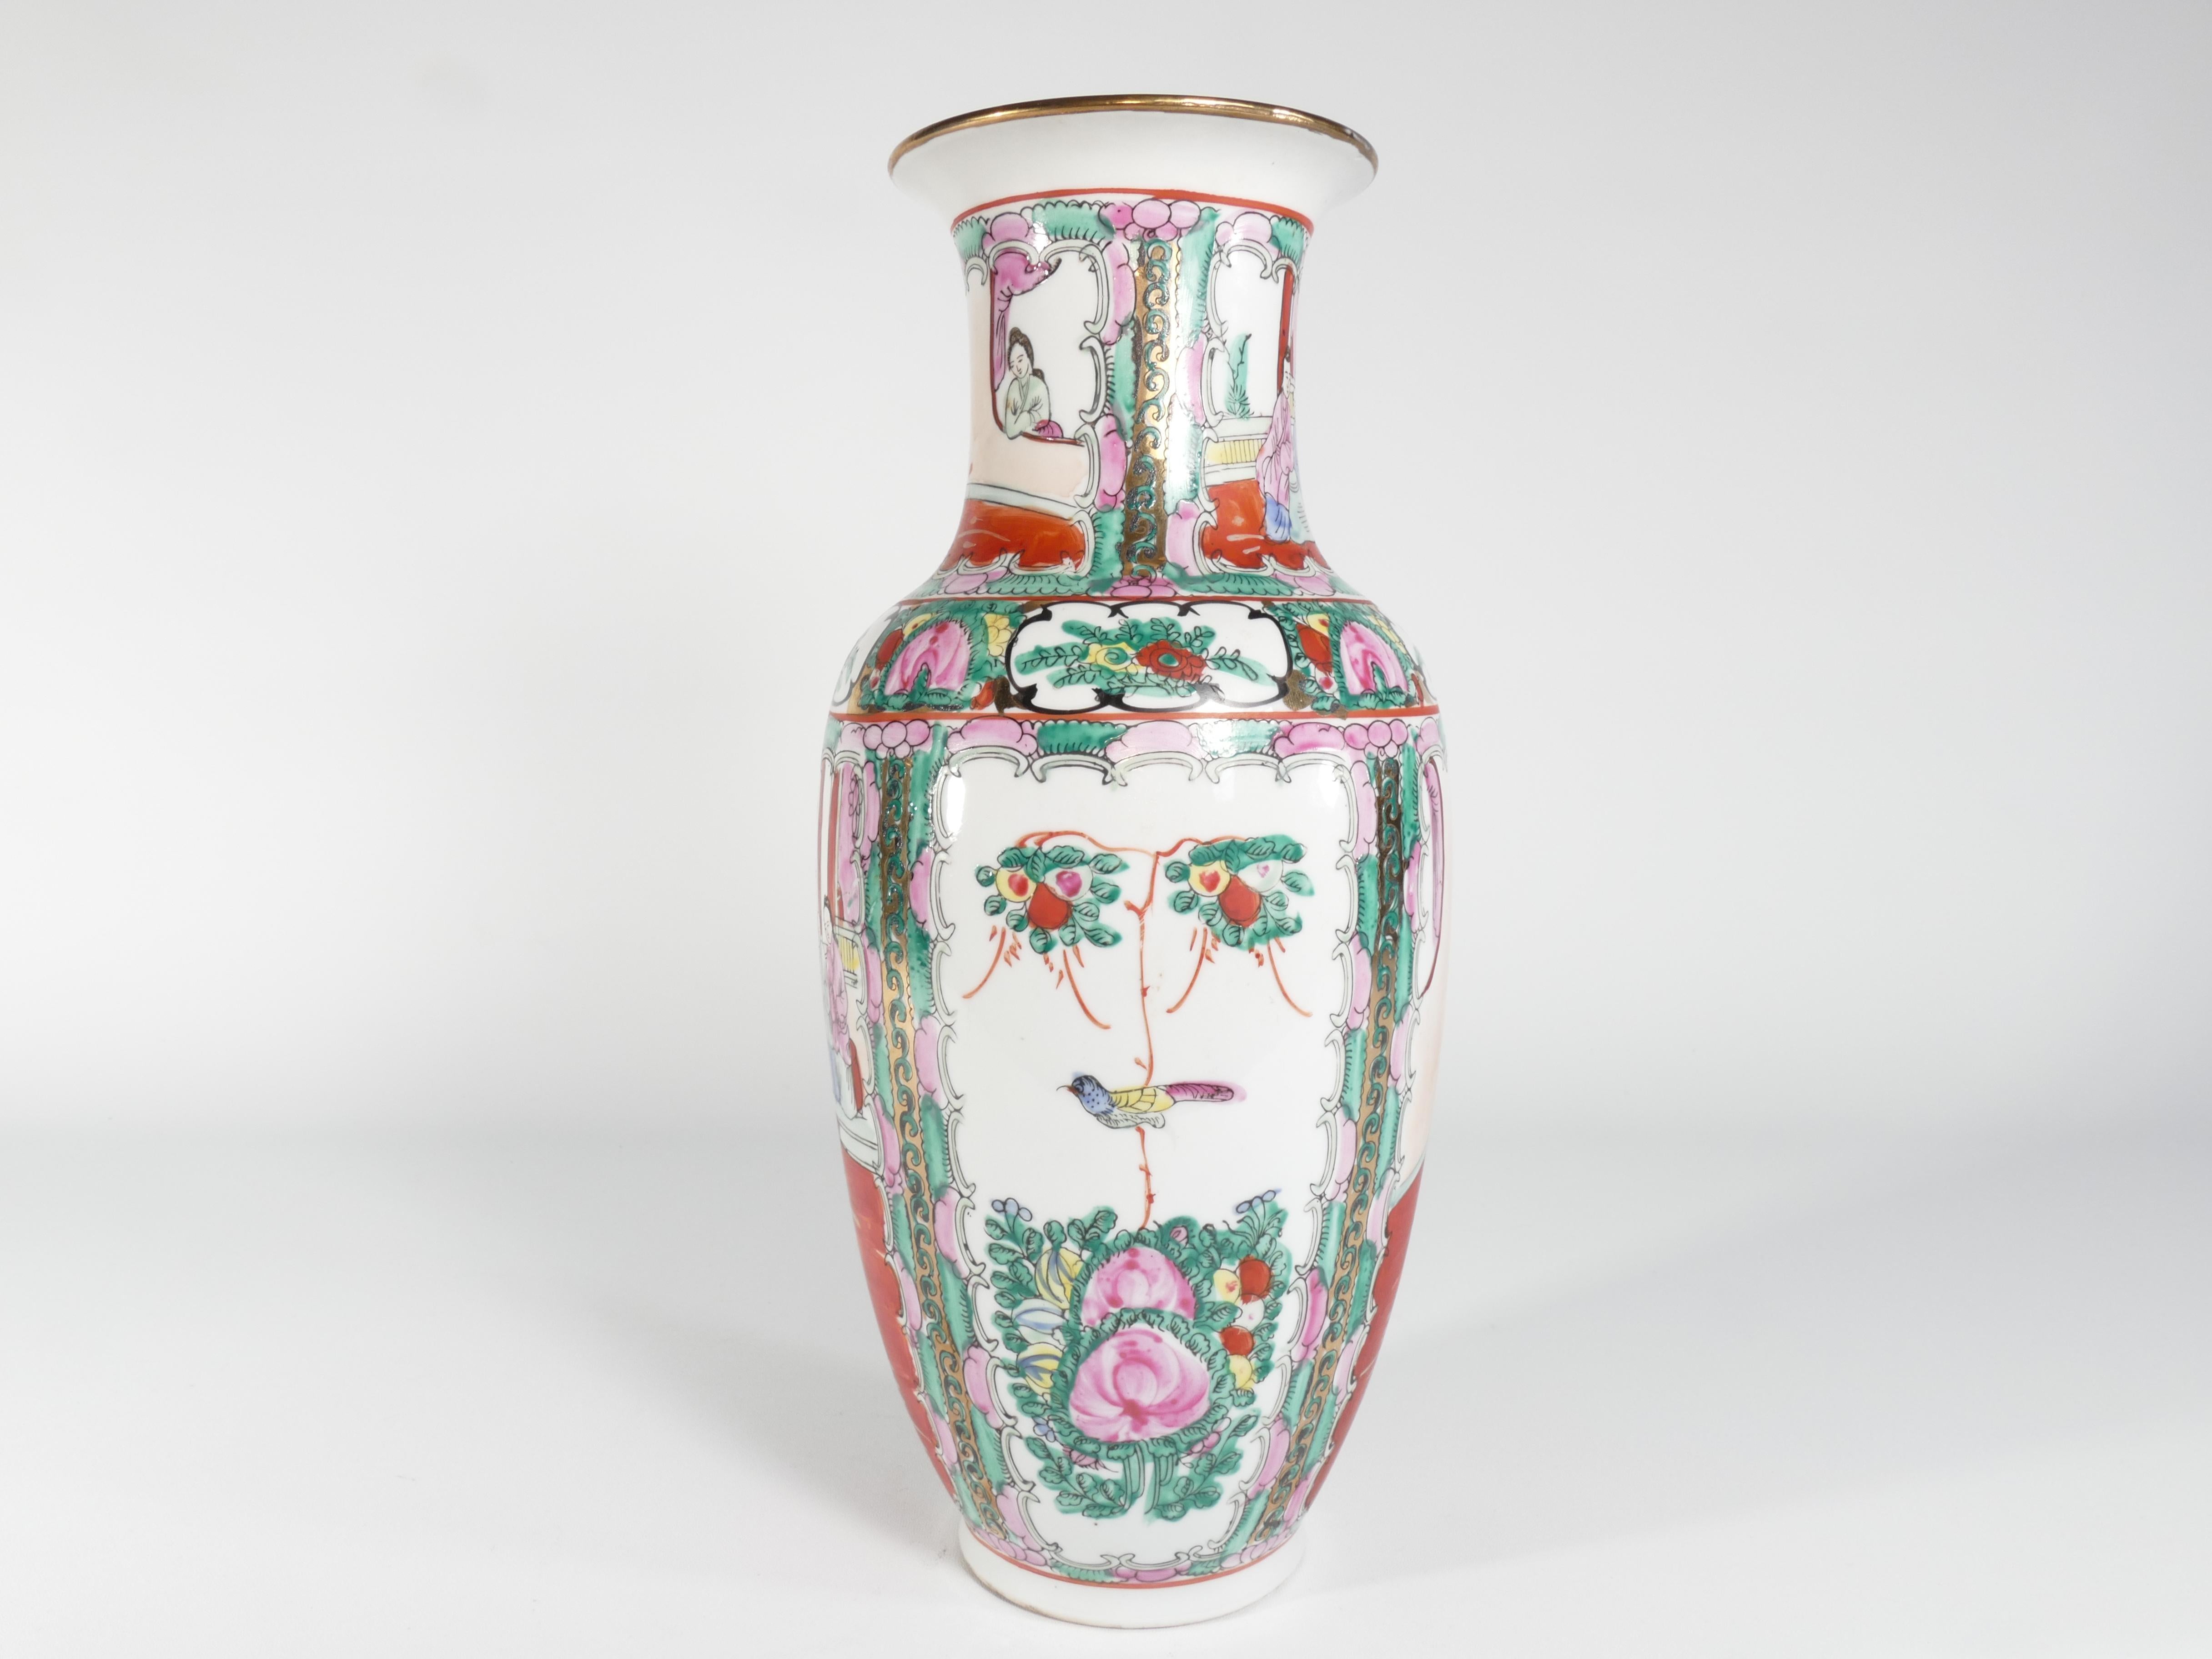 A sizeable Chinese Famille Rose Medallion vase. This vase is hand-painted with the traditional Chinese Rose Medallion motif, incorporating red, pink, and green hues along with gold, yellow, black, and blue accents. The vase body is divided into four